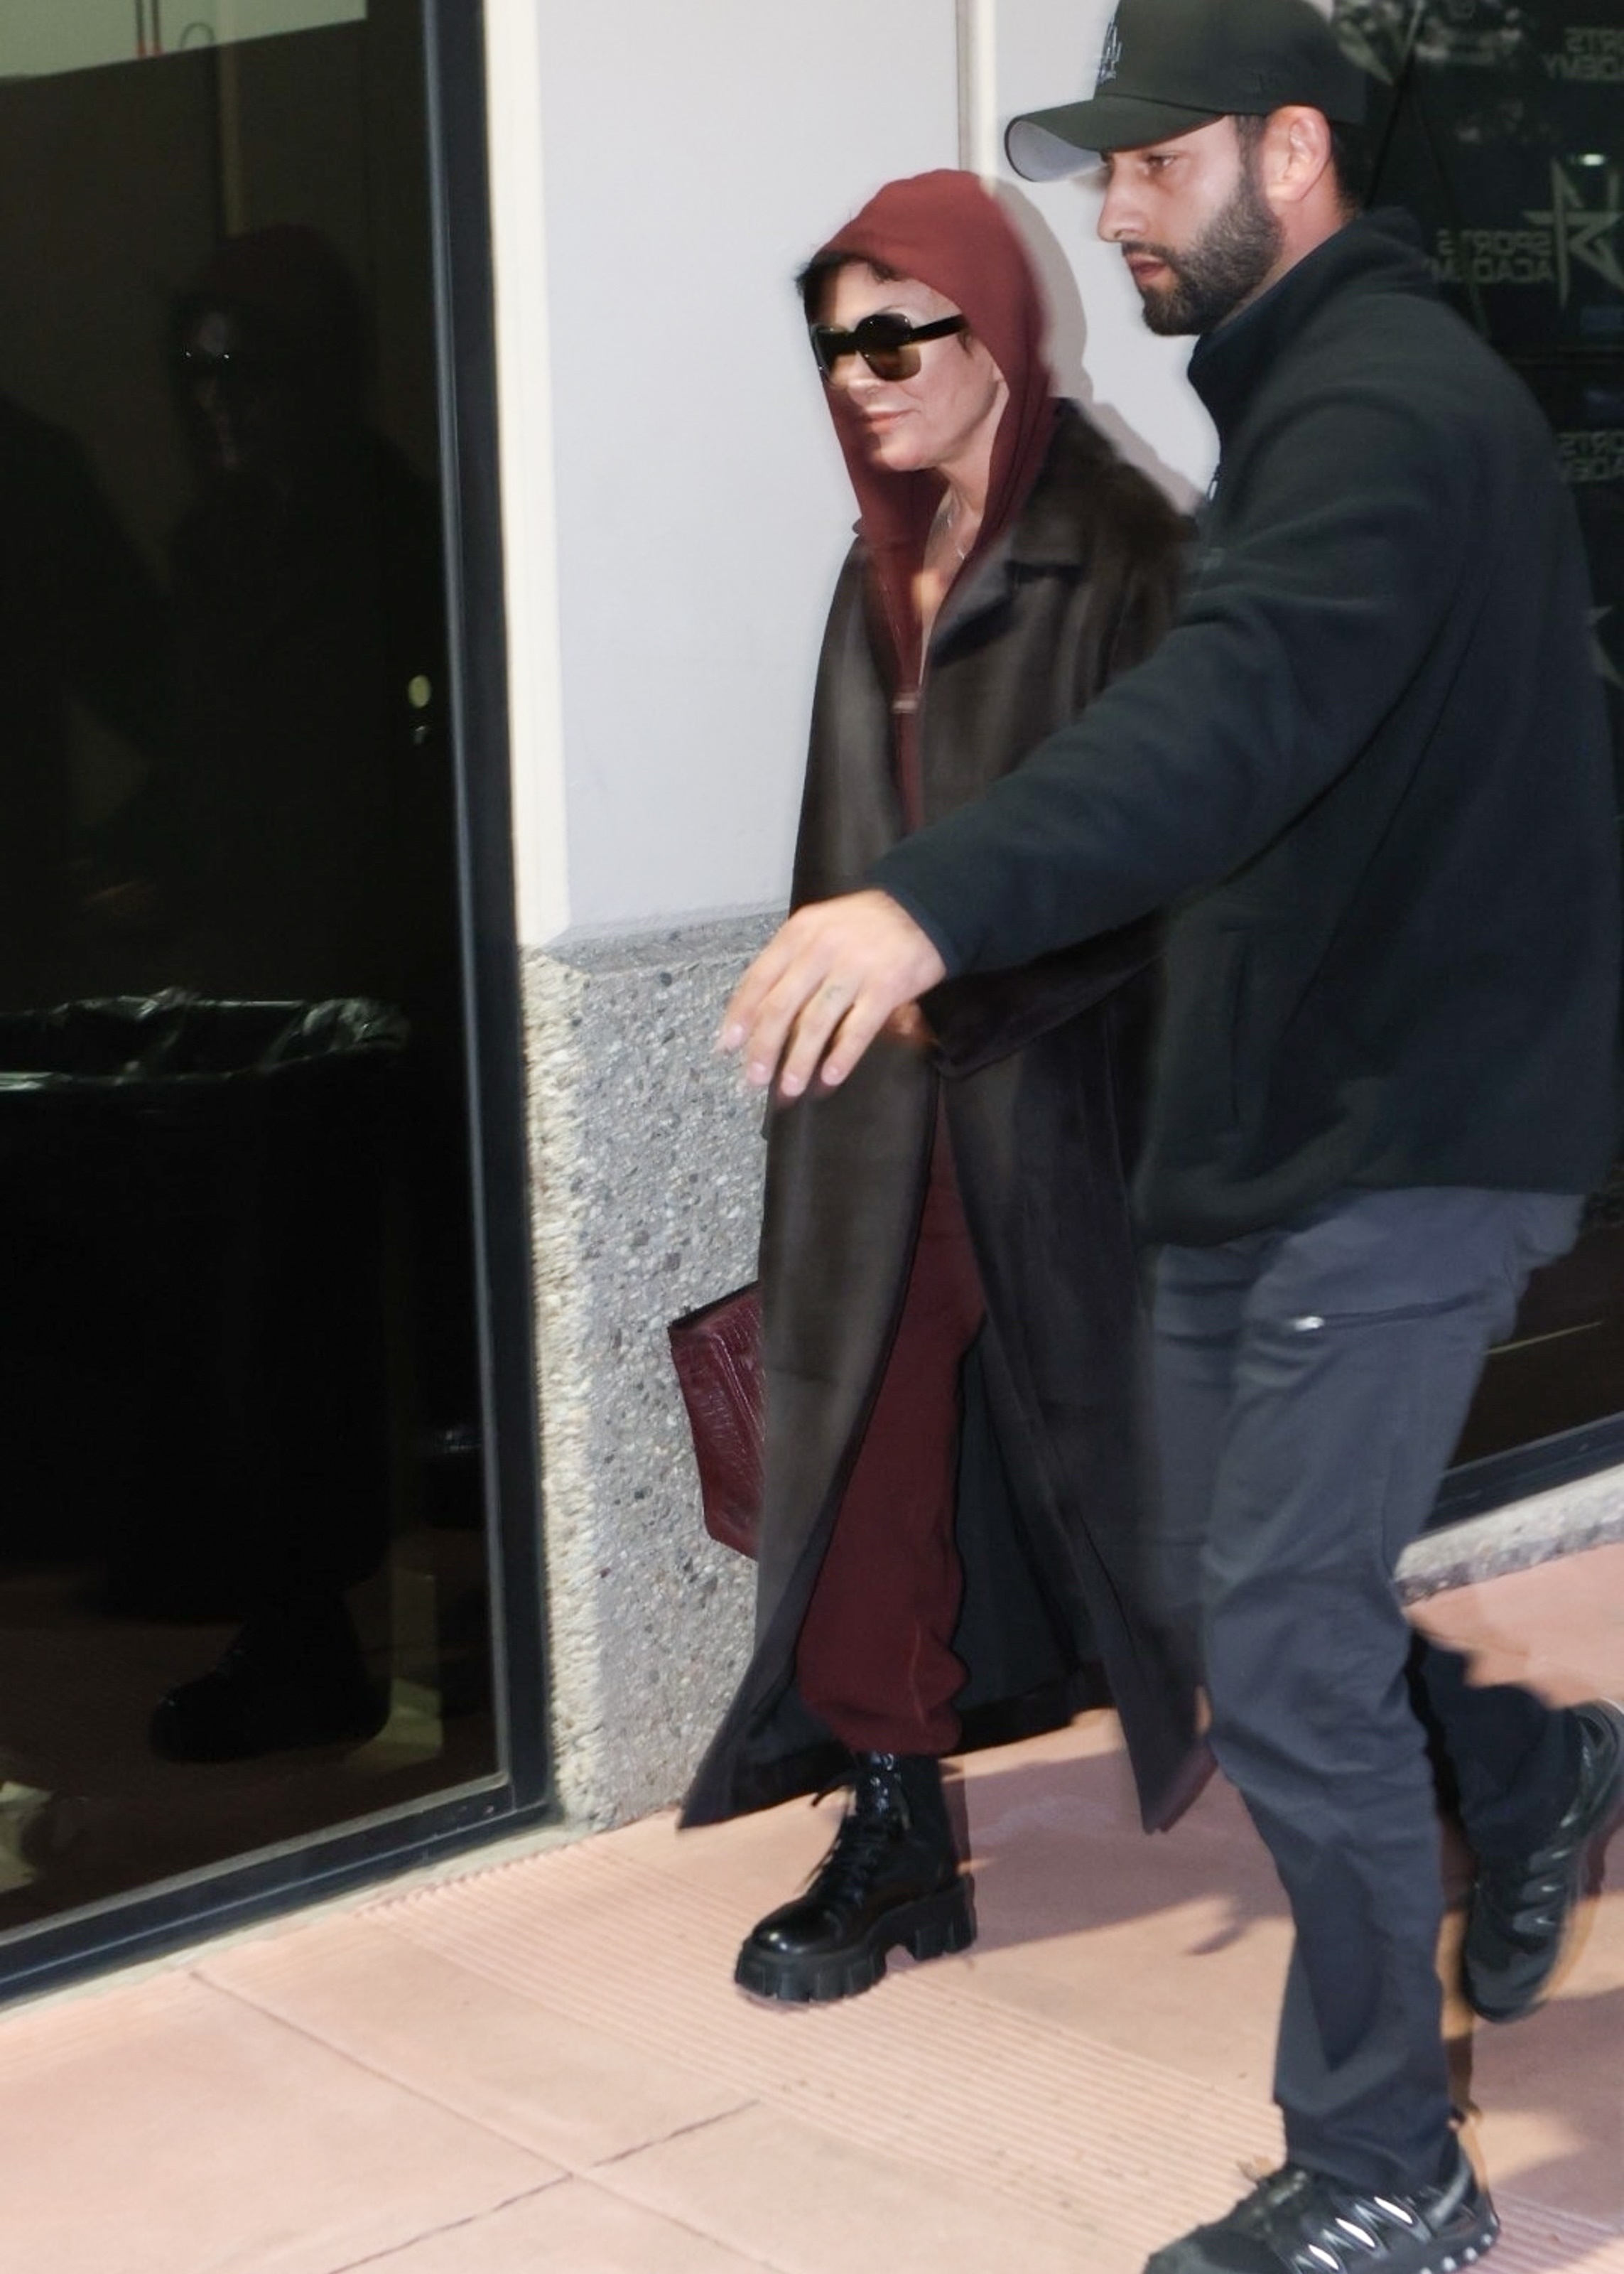 Kris wore a burgundy jumpsuit, fur coat, and boots, and carried a Birkin bag